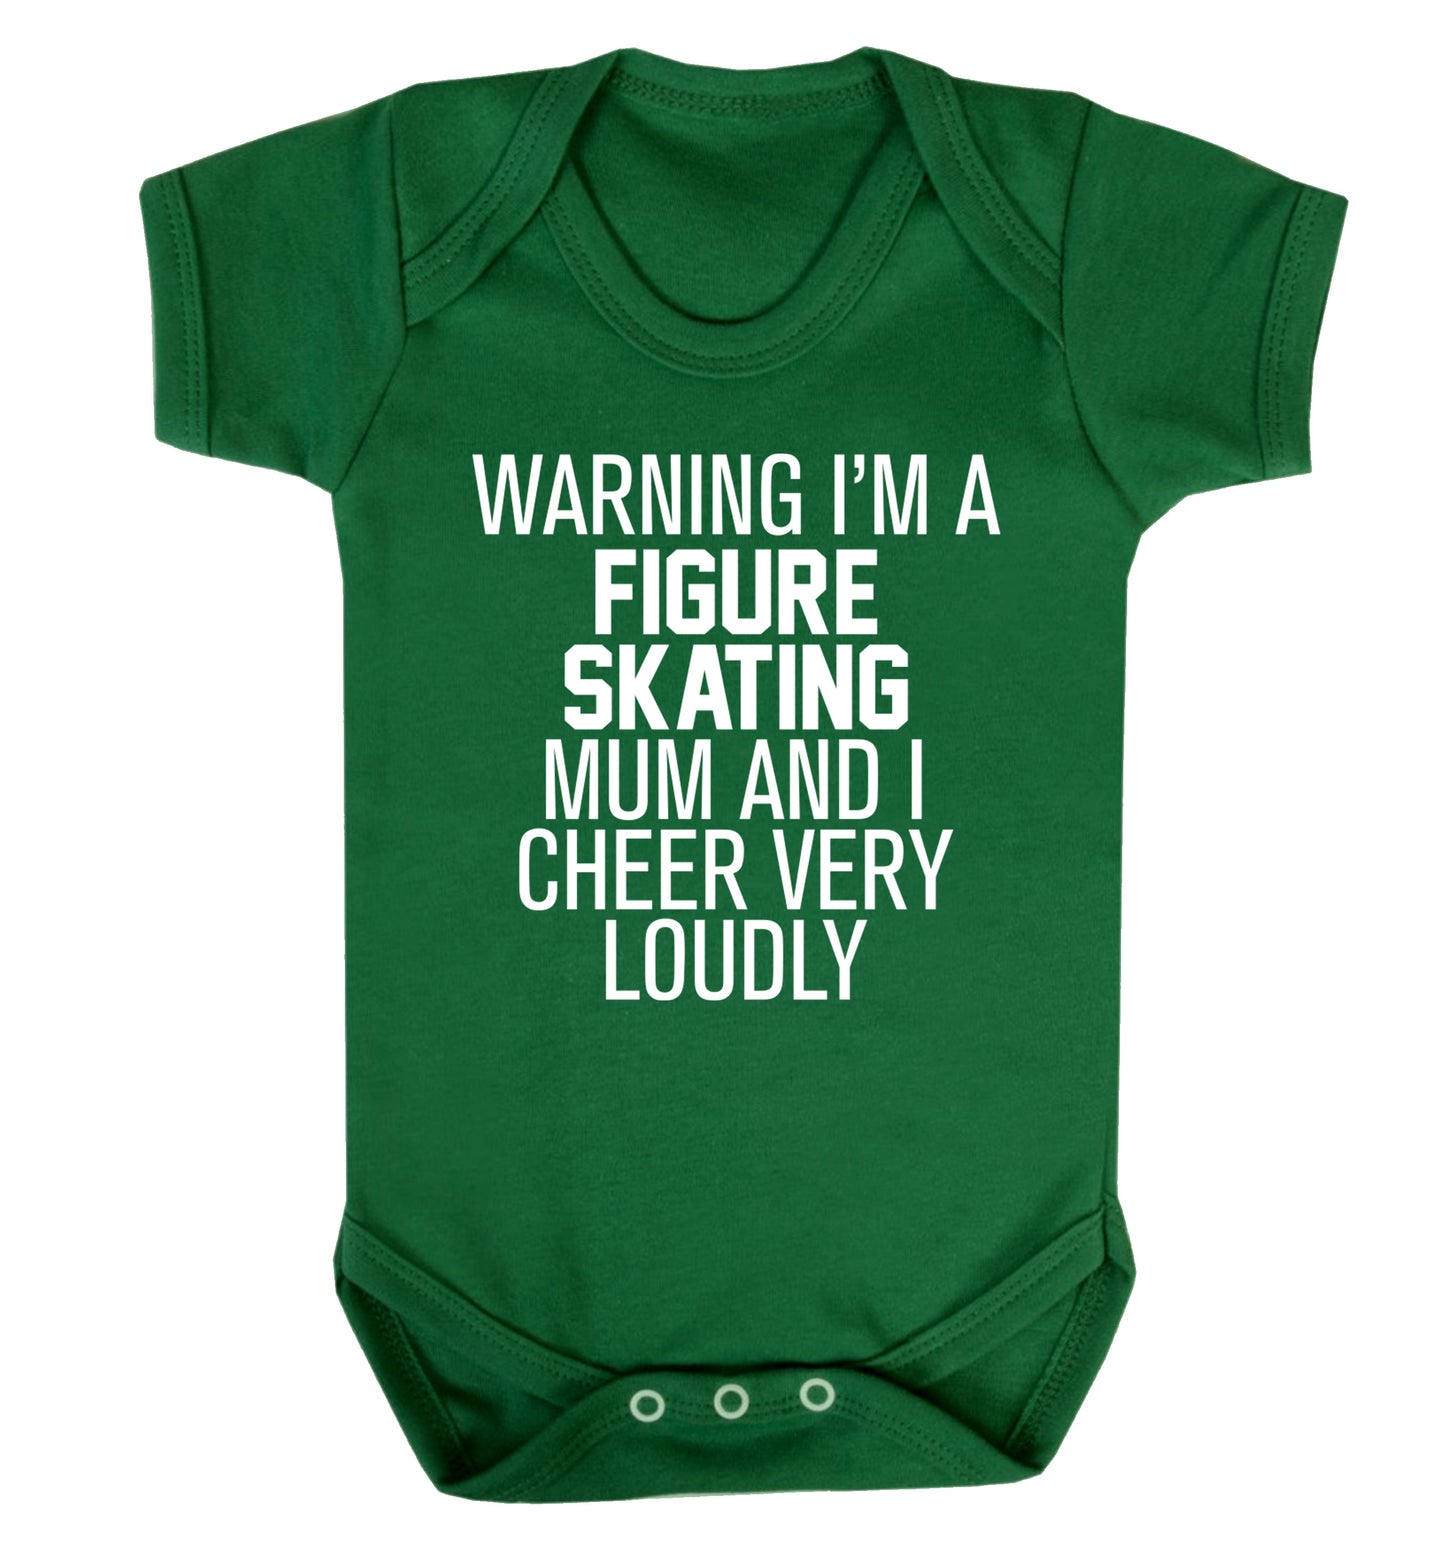 Warning I'm a figure skating mum and I cheer very loudly Baby Vest green 18-24 months